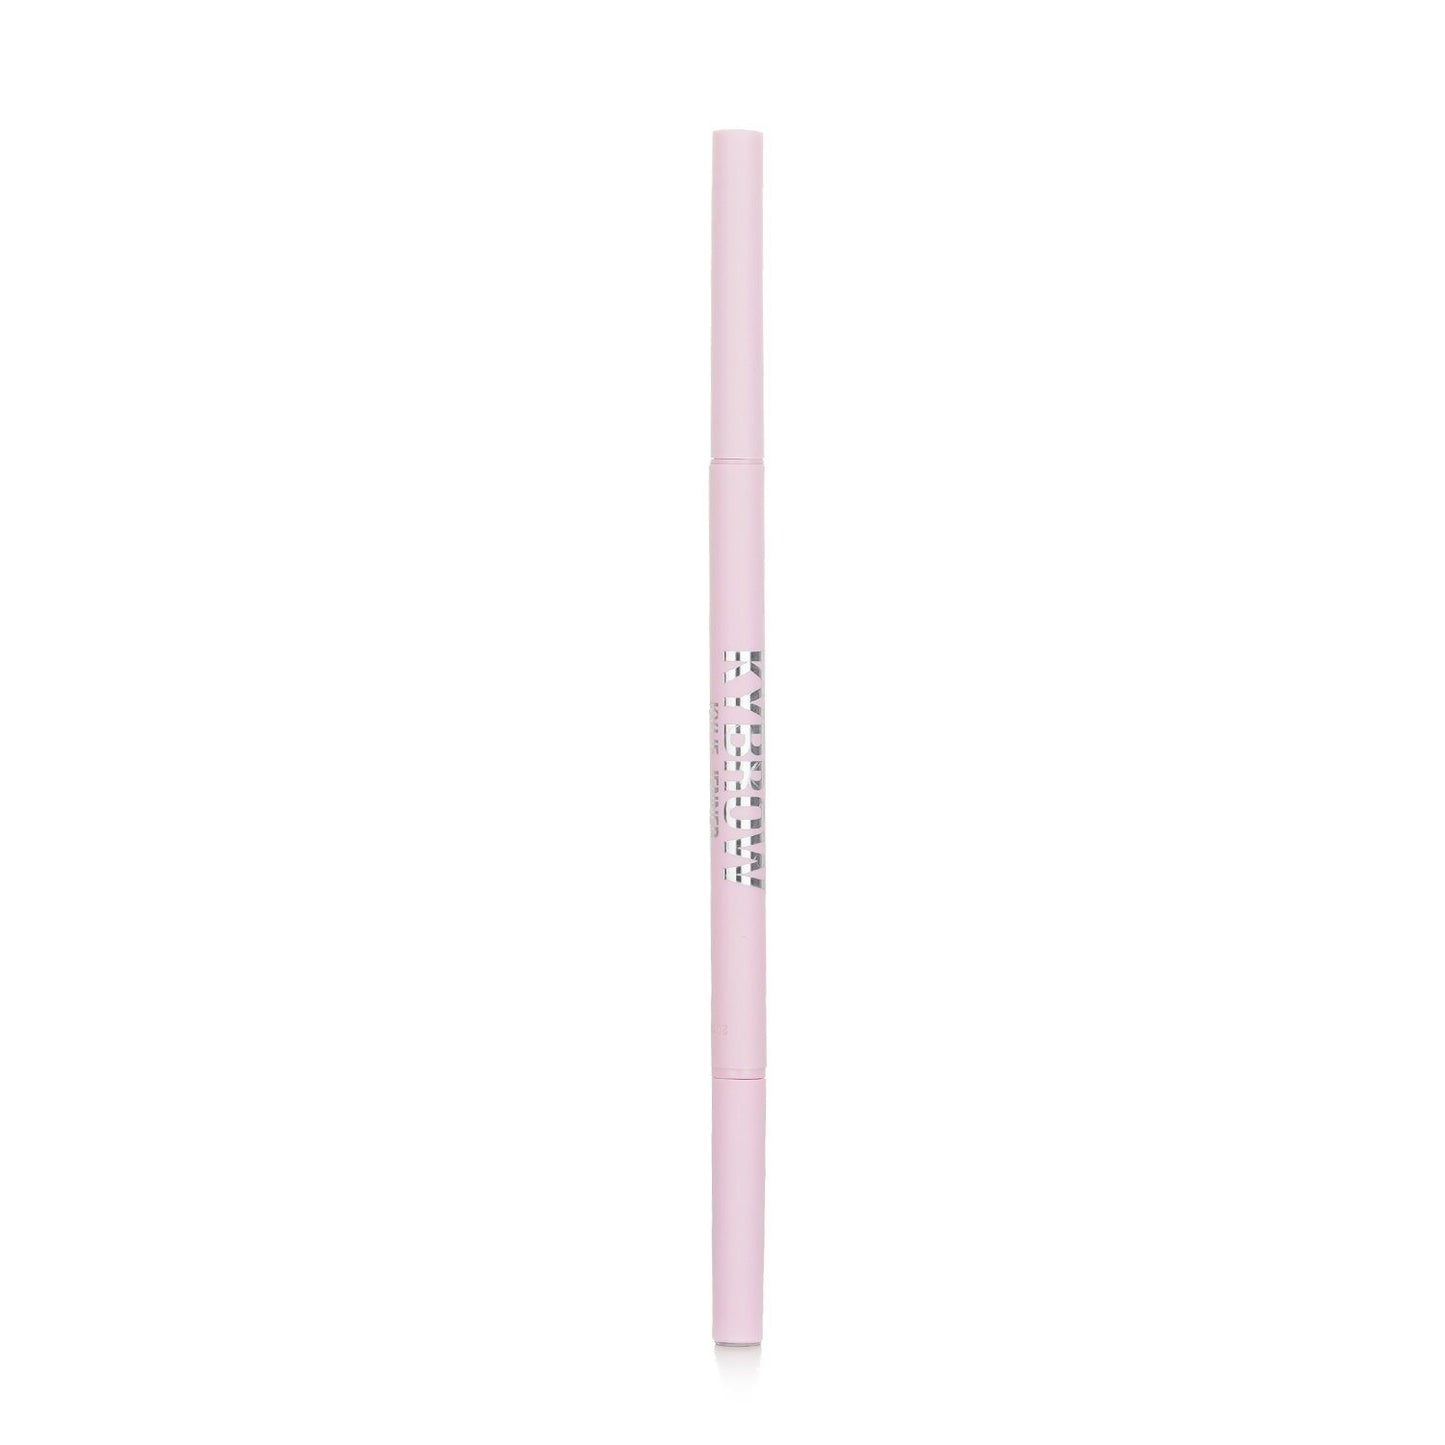 KYLIE COSMETICS - Kybrow Pencil - # 003 Cool Brown 0.09g/0.003oz